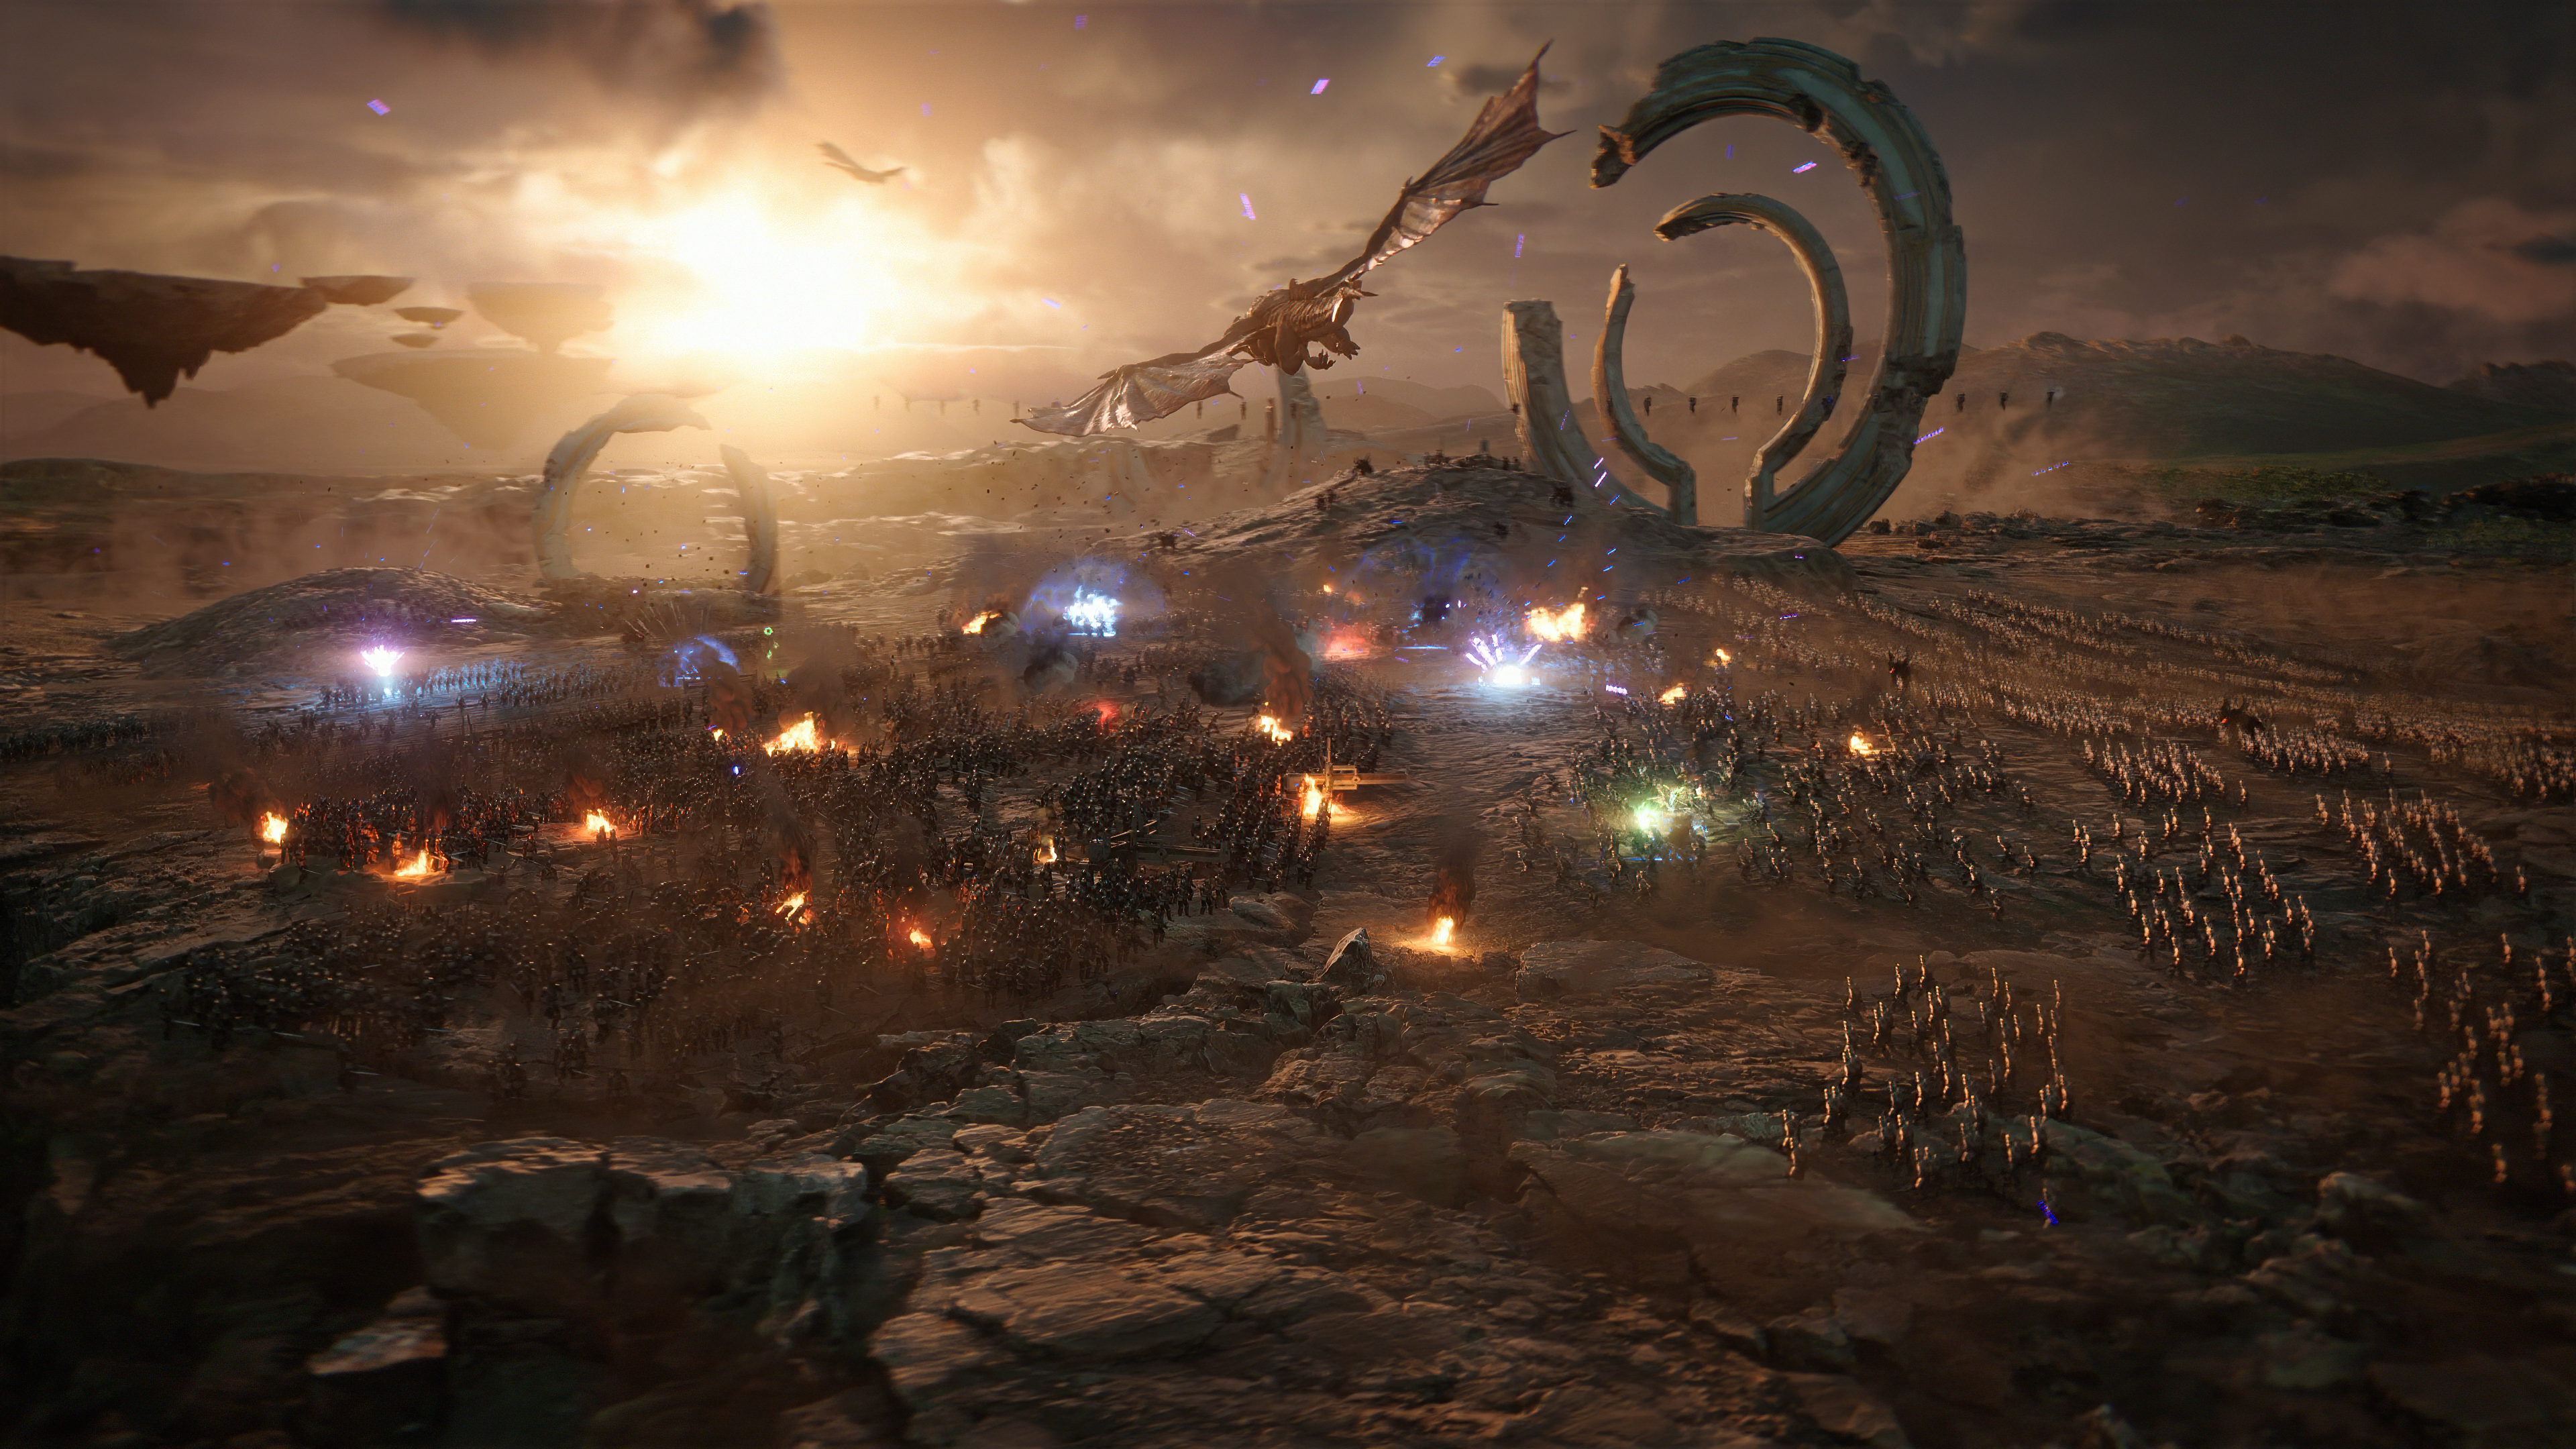 Preview: 'Immortals of Aveum' is more than just 'Call of Duty